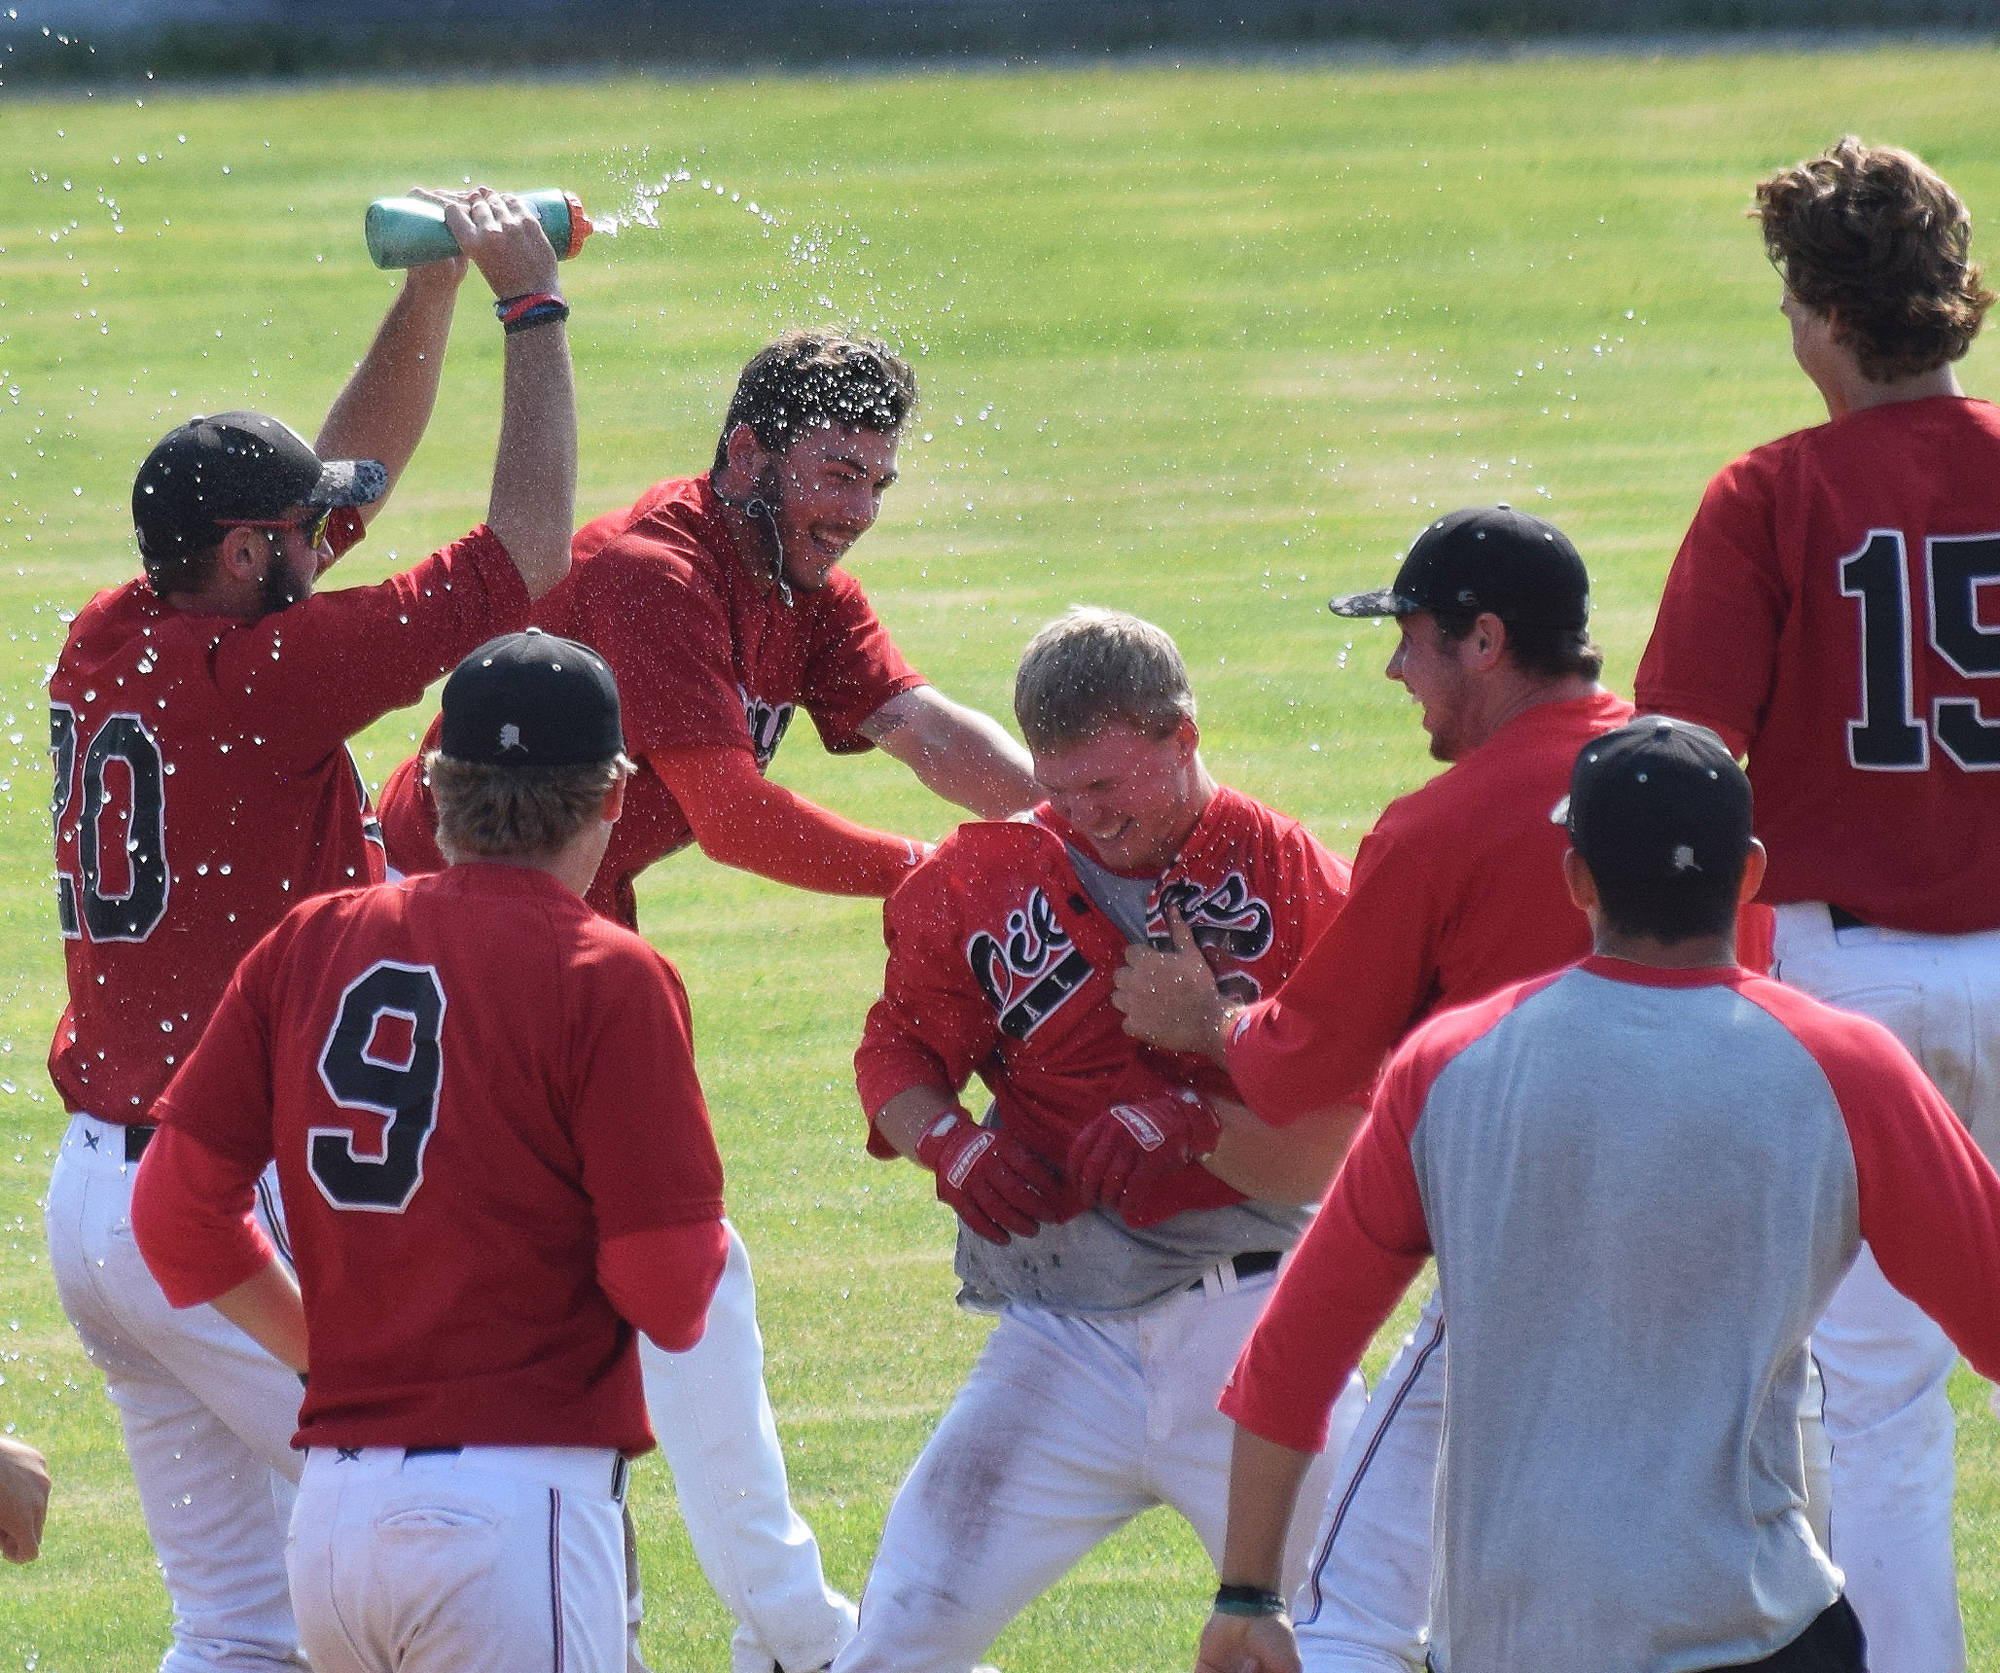 Peninsula Oilers outfielder Paul Steffensen (center) is mobbed by teammates after delivering the game-winning play Sunday, July 7, 2019, against the Mat-Su Miners at Coral Seymour Memorial Park in Kenai, Alaska. (Photo by Joey Klecka/Peninsula Clarion)